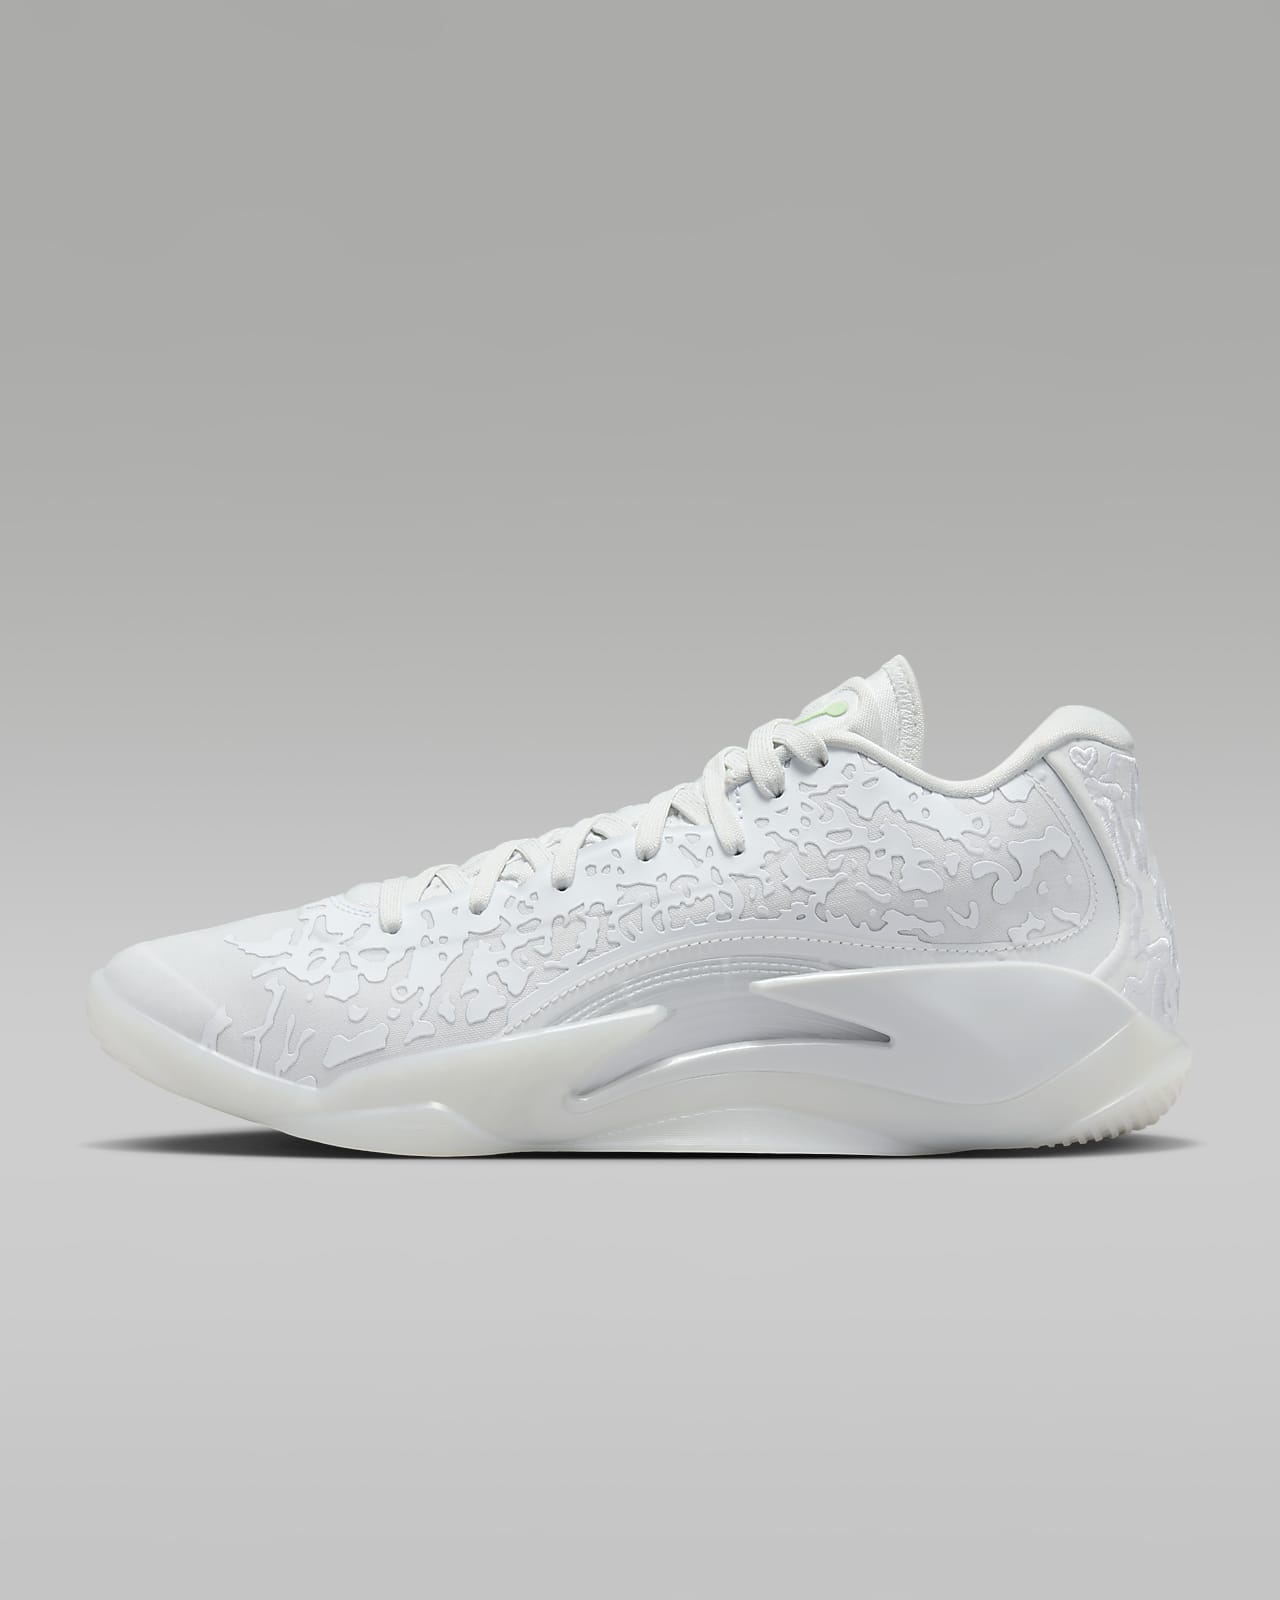 Zion 3 Basketball Shoes